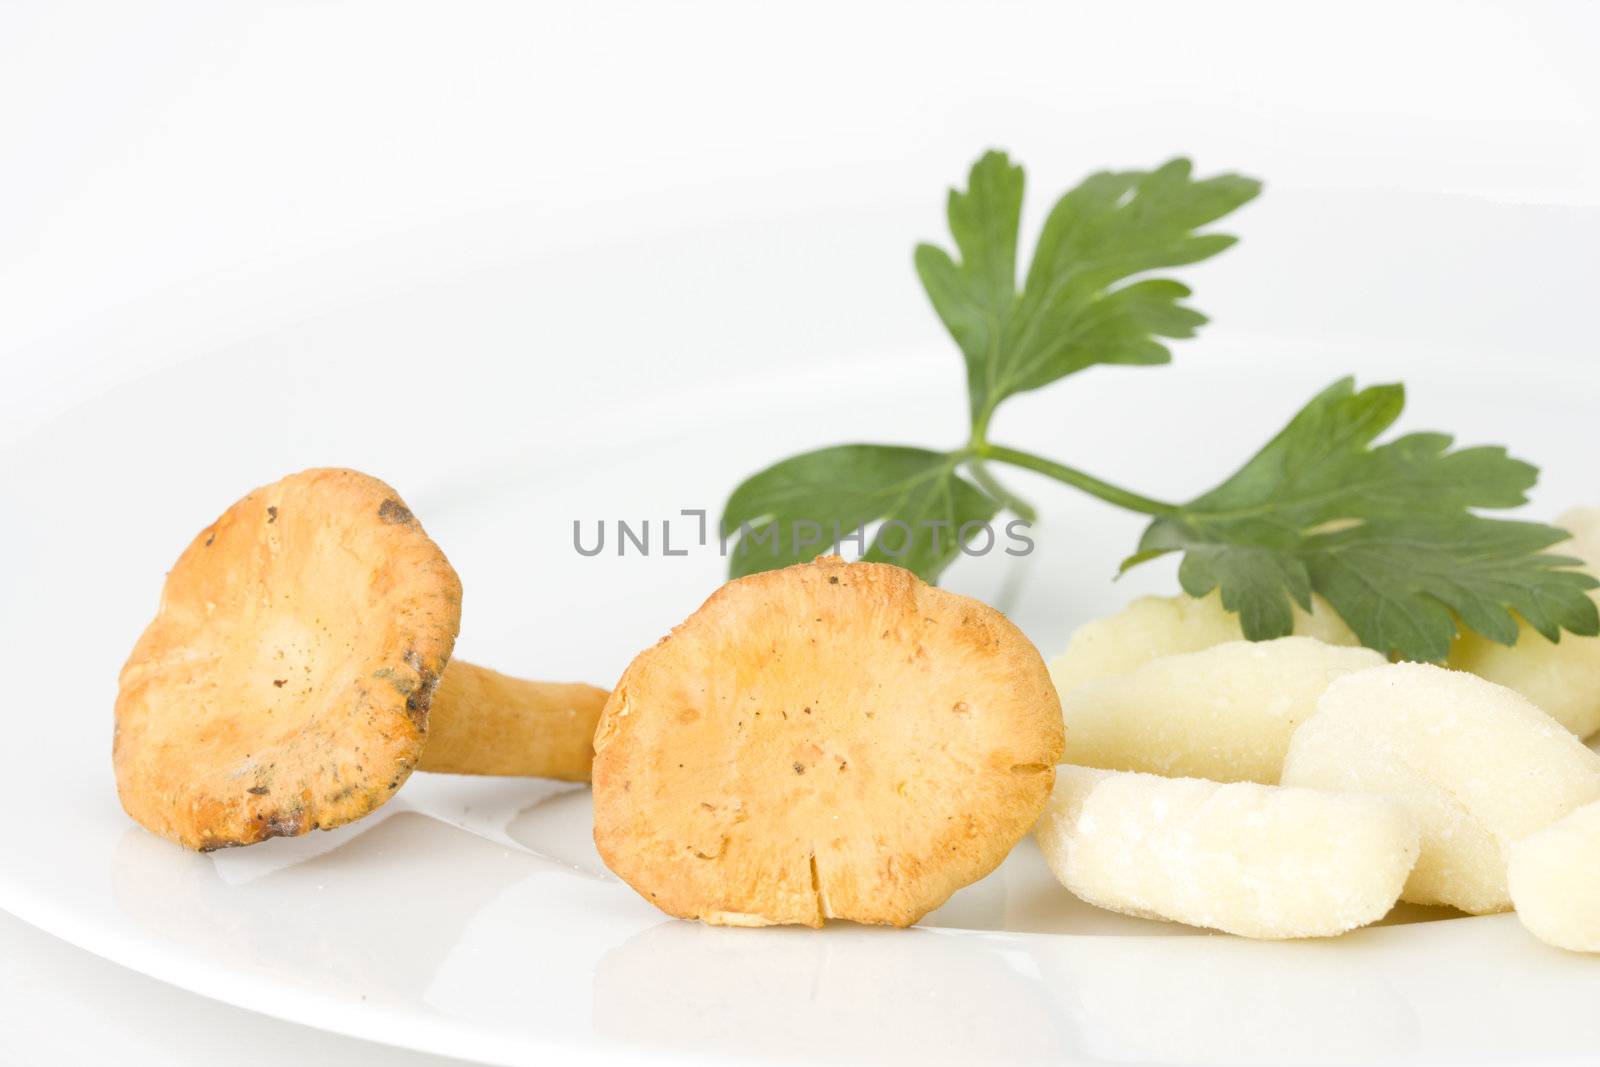 uncooked gnocchi noodles on a plate by bernjuer